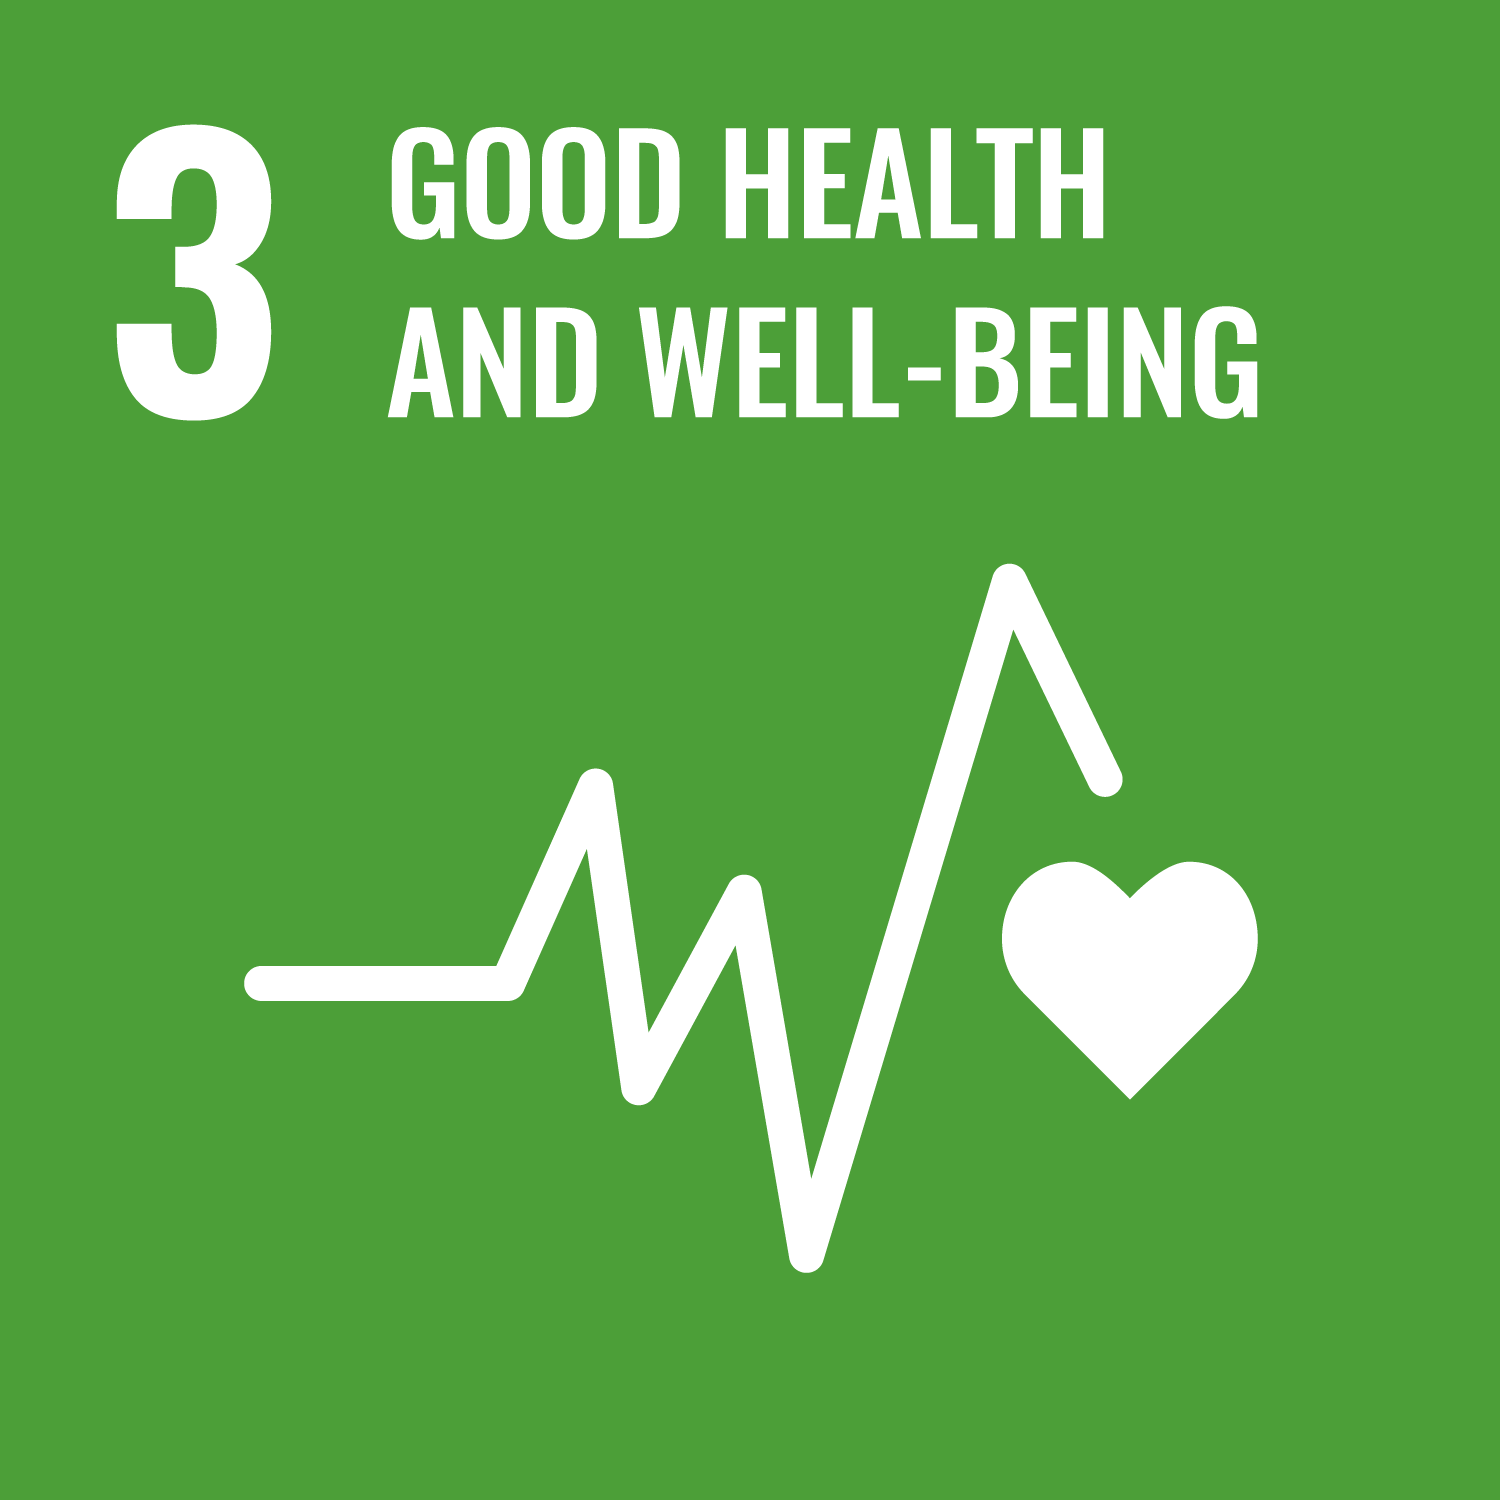 SDG Goal for Good Health and Well-being